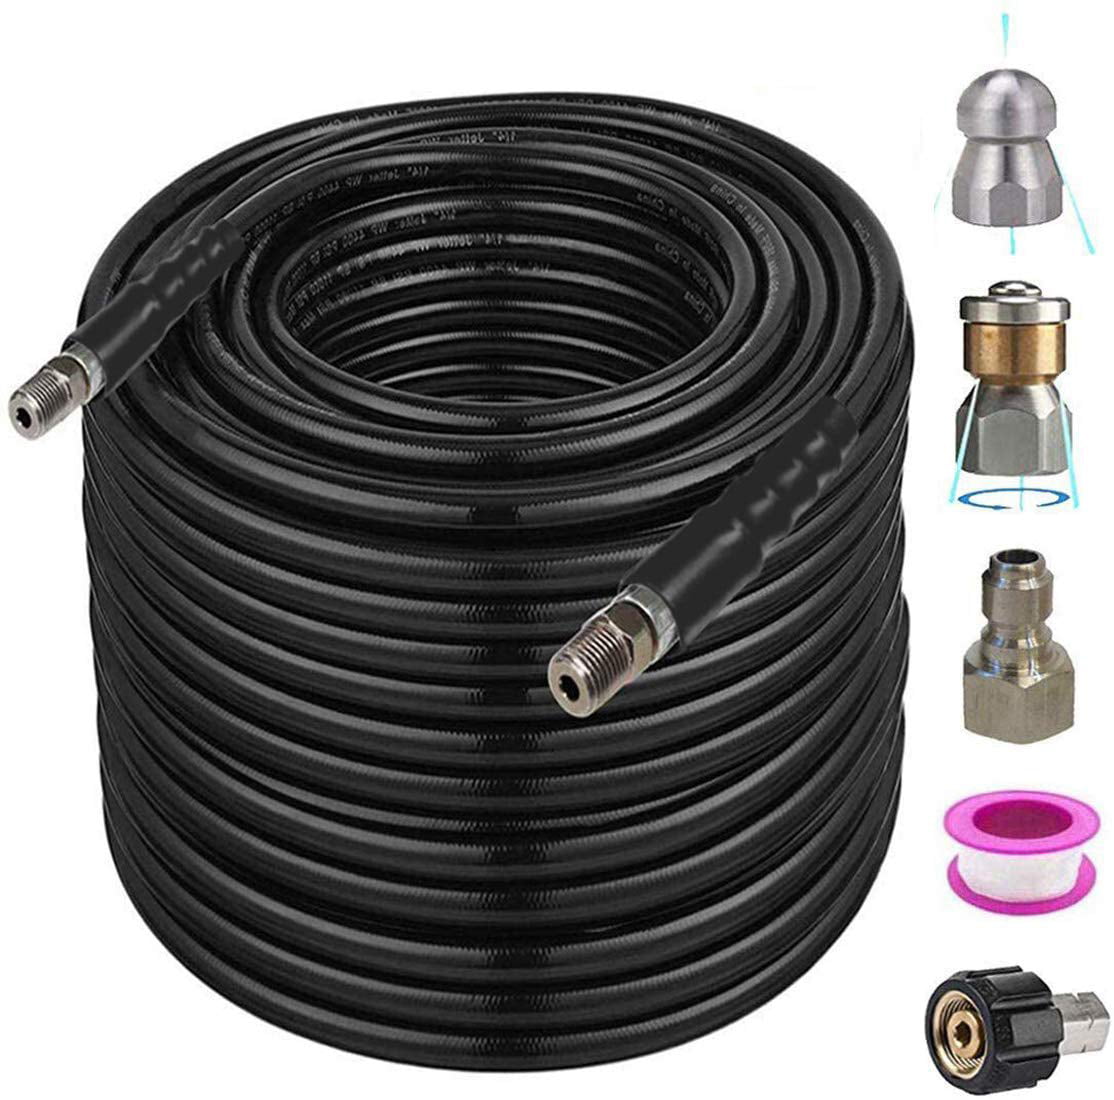 Sewer Jetter Nozzles Kit 100FT For Pressure Washer Drain Cleaning Hose USA 